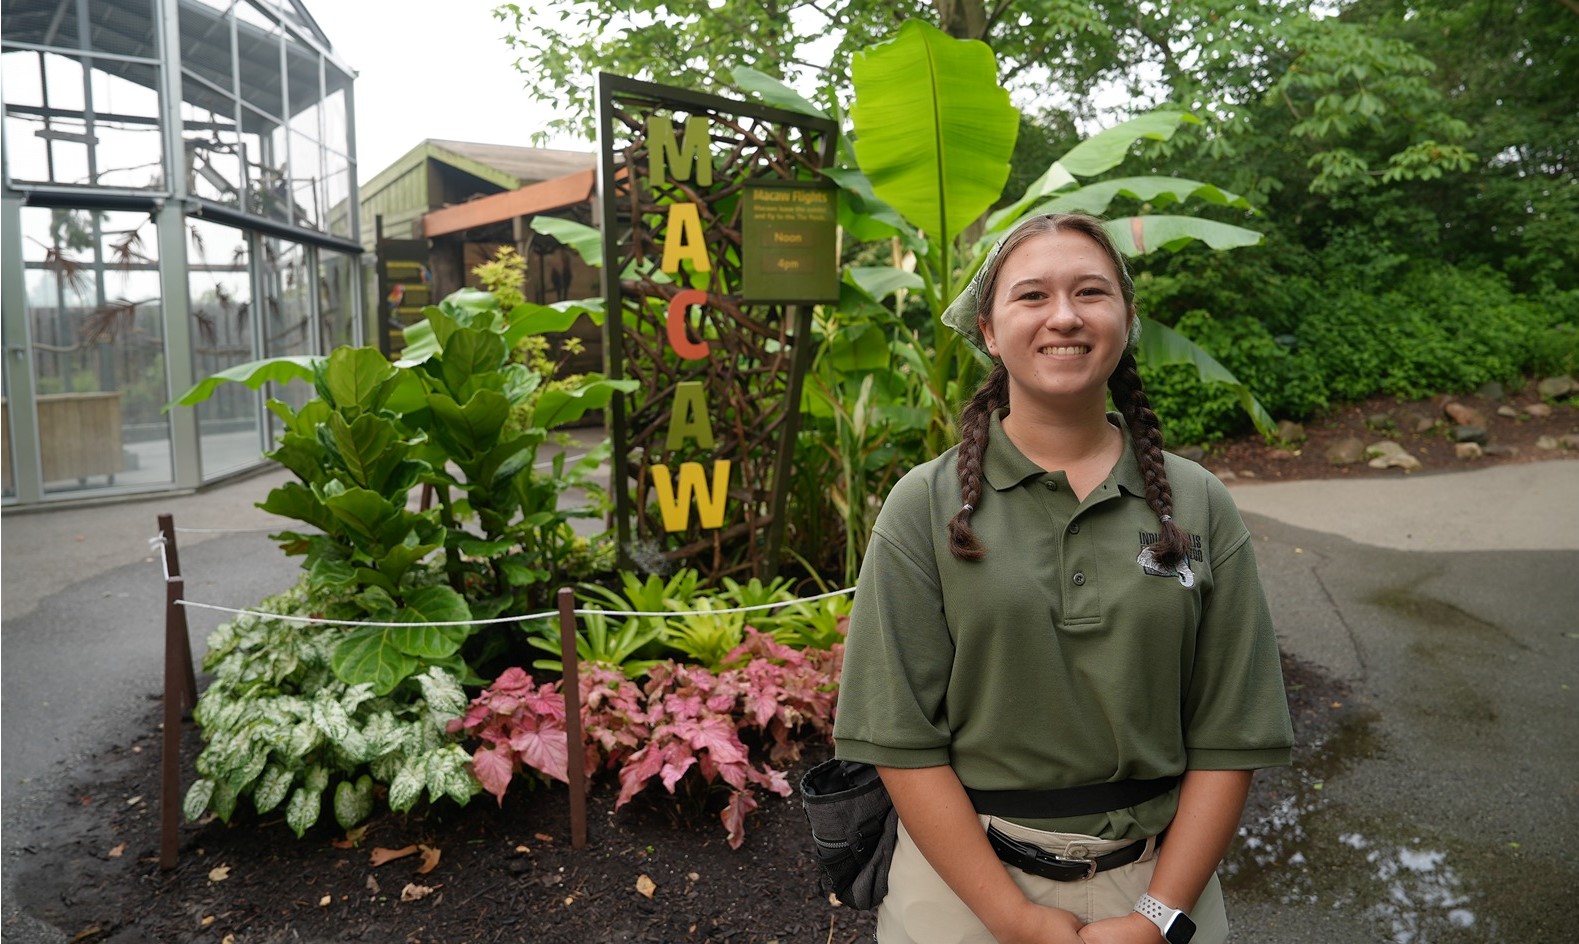 Student Emily Carlisle stands in a green polo next to a sign with letters that spell "macaw" in front of a macaw enclosure